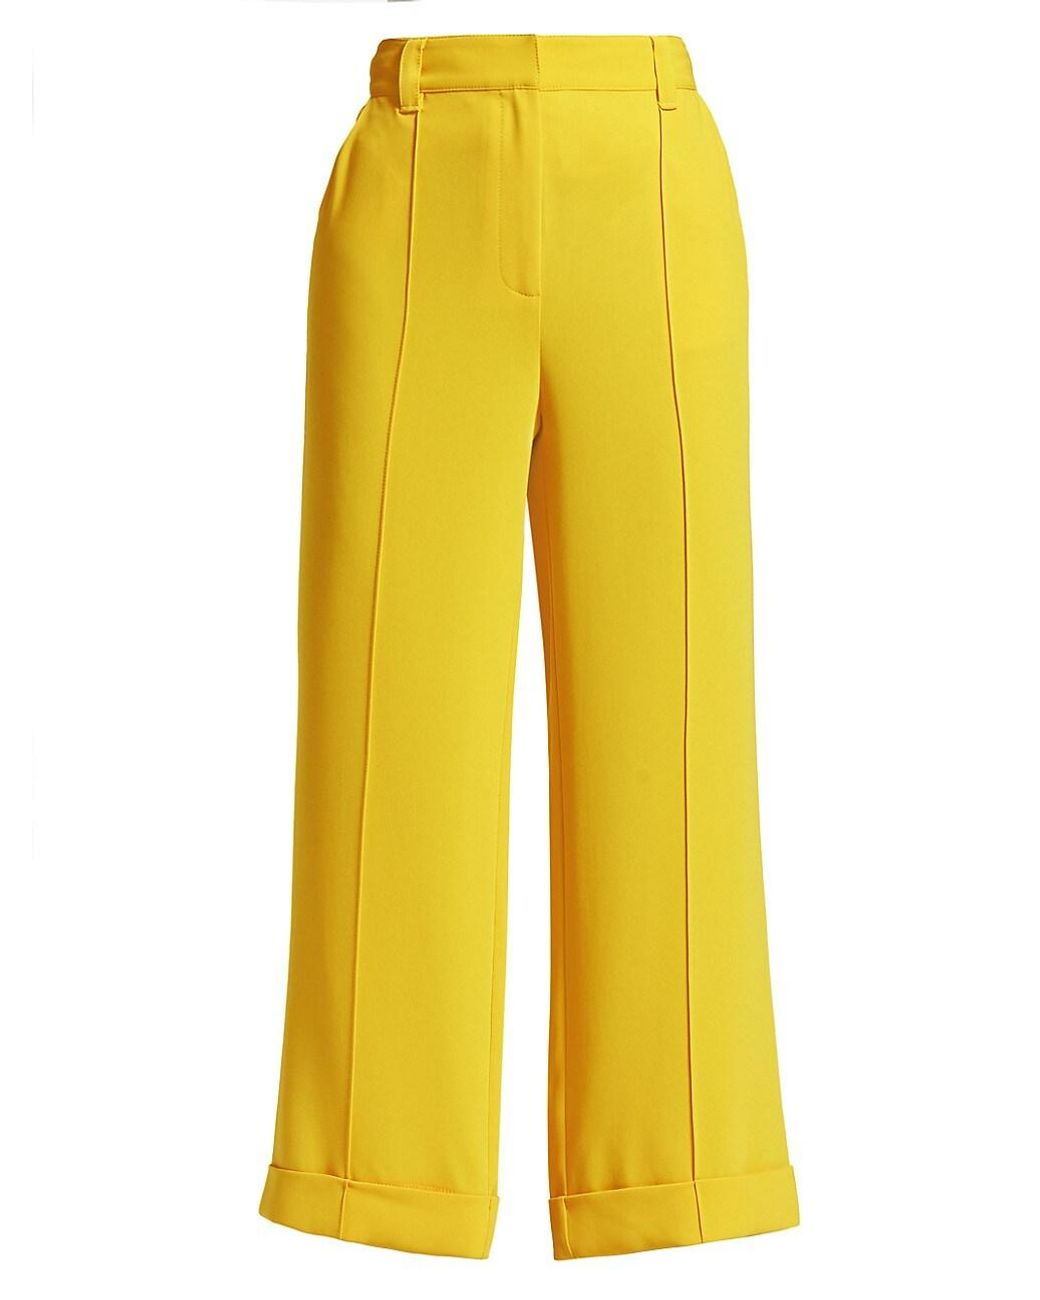 Cinq À Sept Synthetic Kris Cropped Flare Pants in Yellow | Lyst